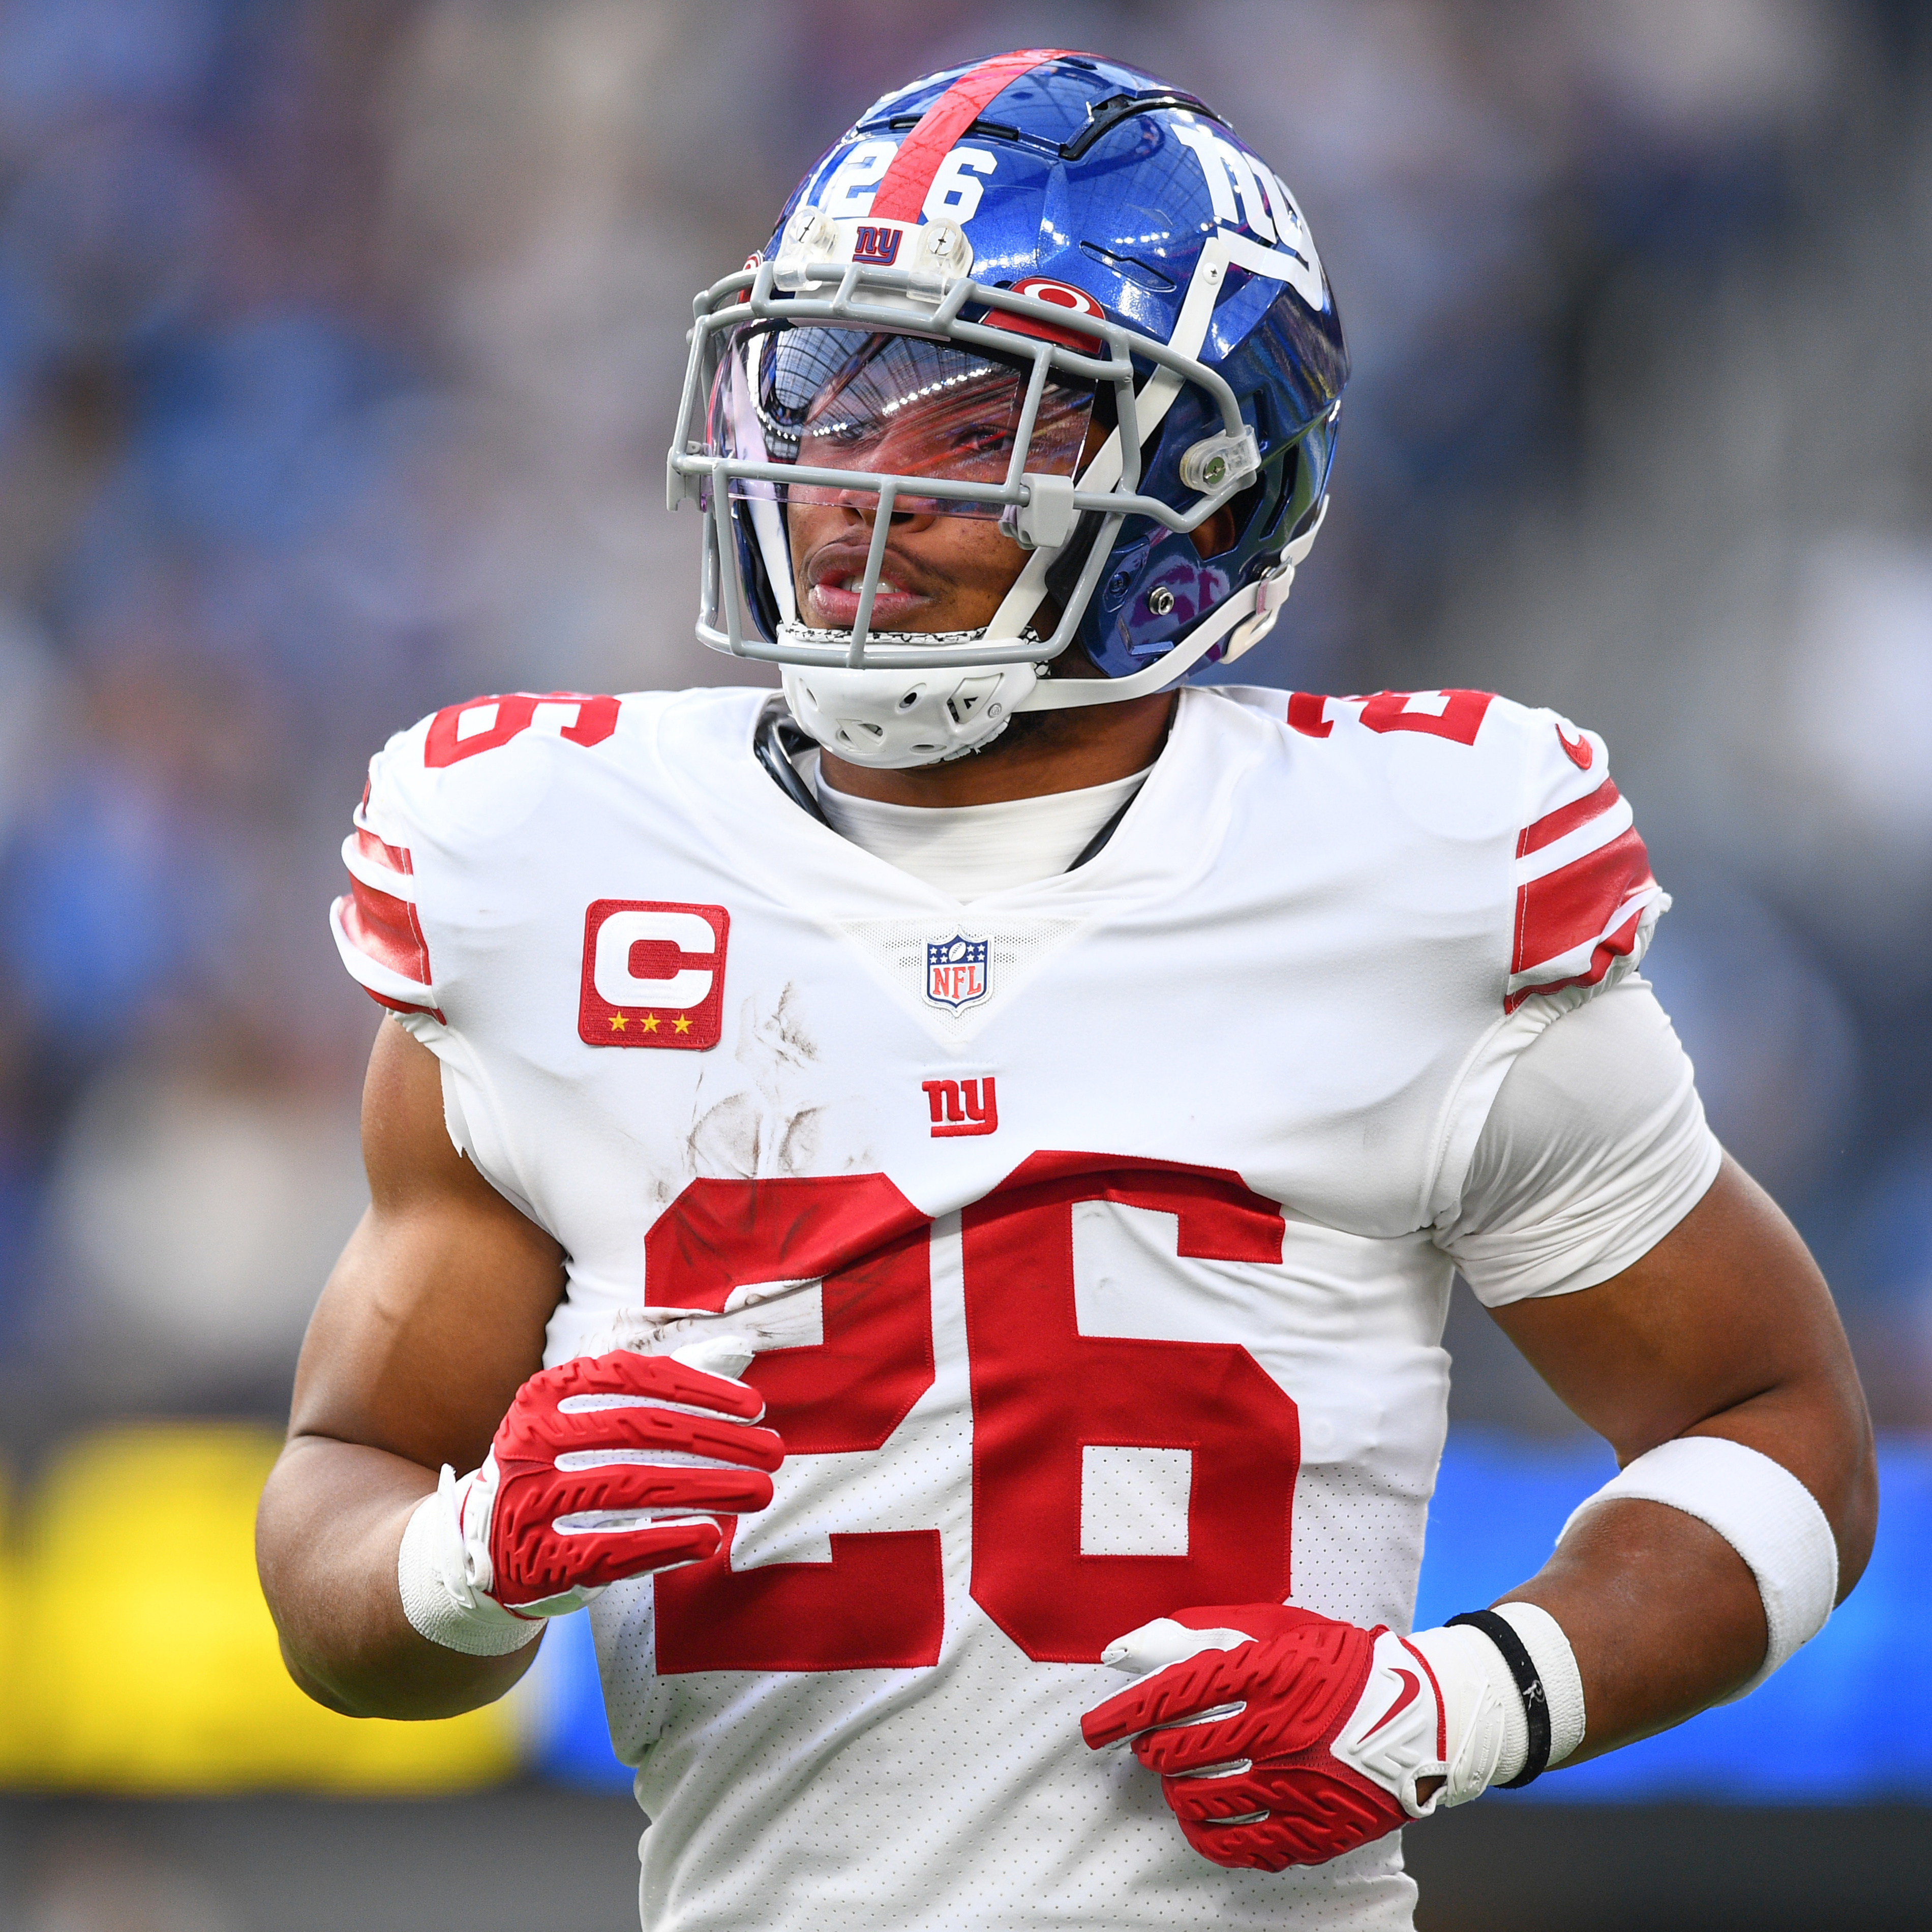 Giants’ Saquon Barkley: ‘I Feel Like I Can Trust My Knee Again’ After Injuries